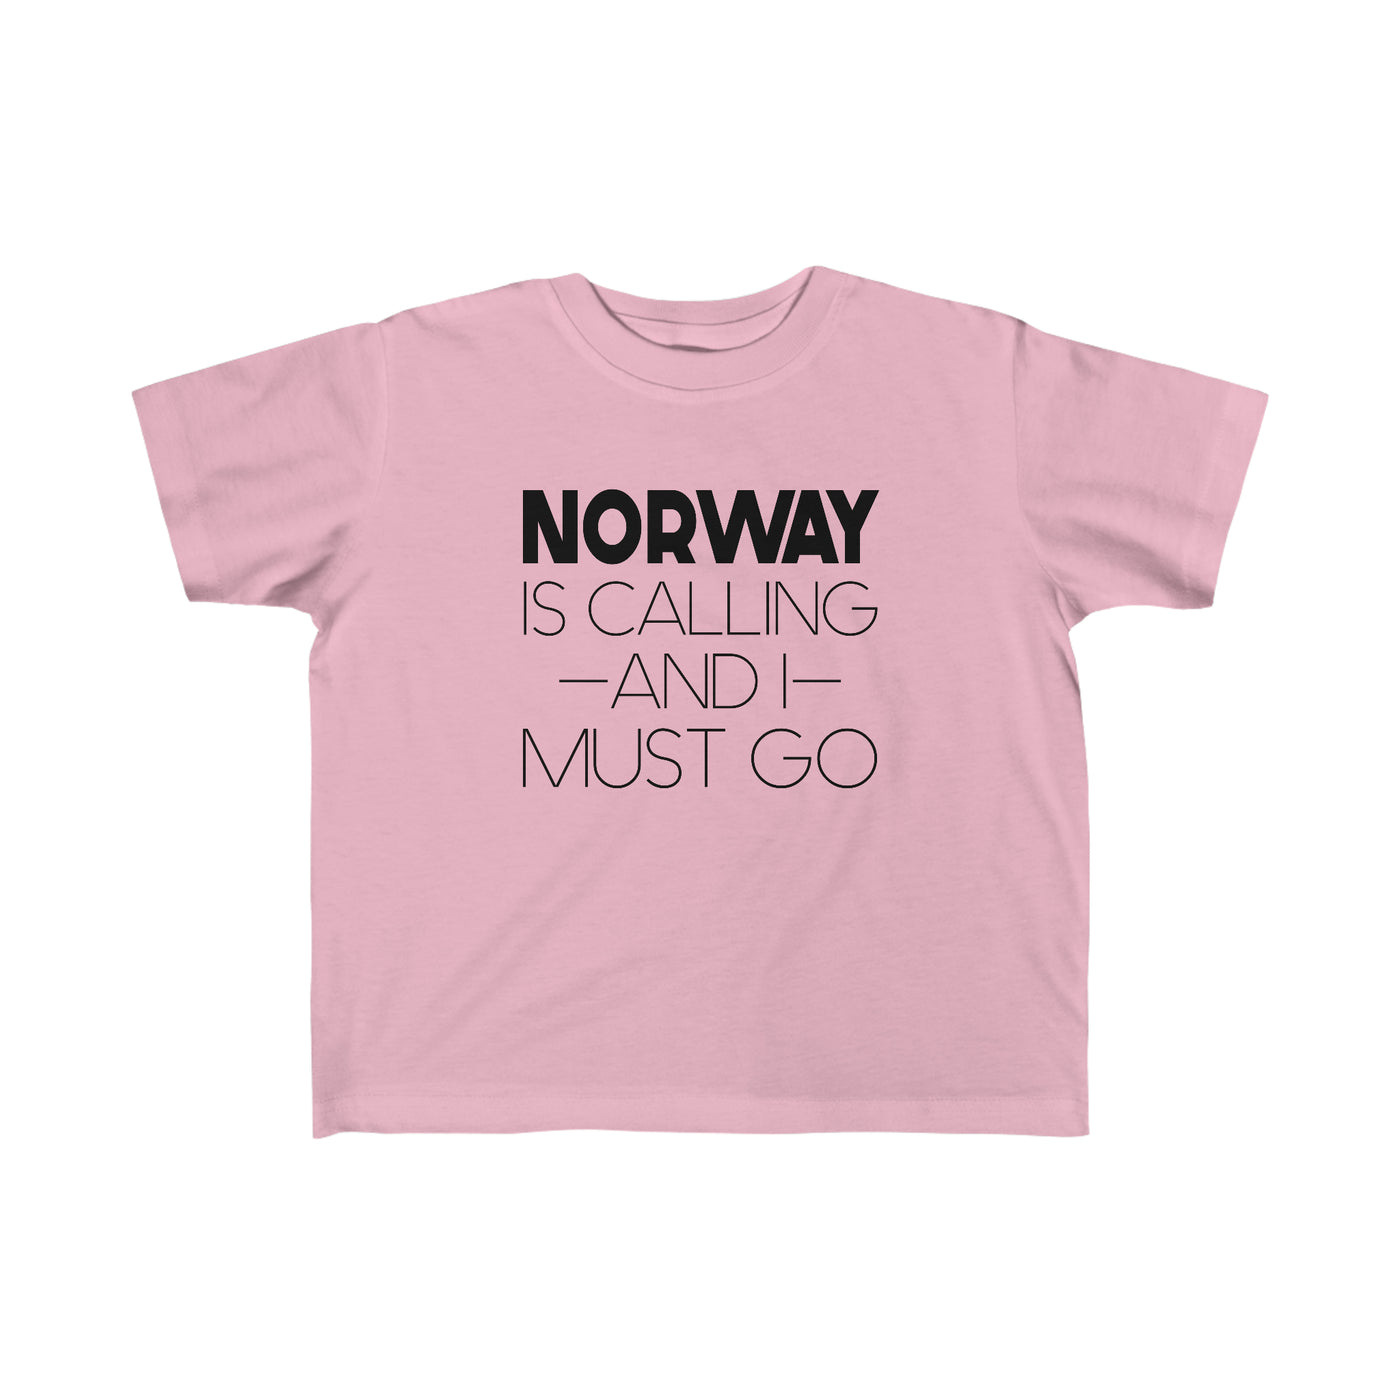 Norway Is Calling And I Must Go Toddler Tee